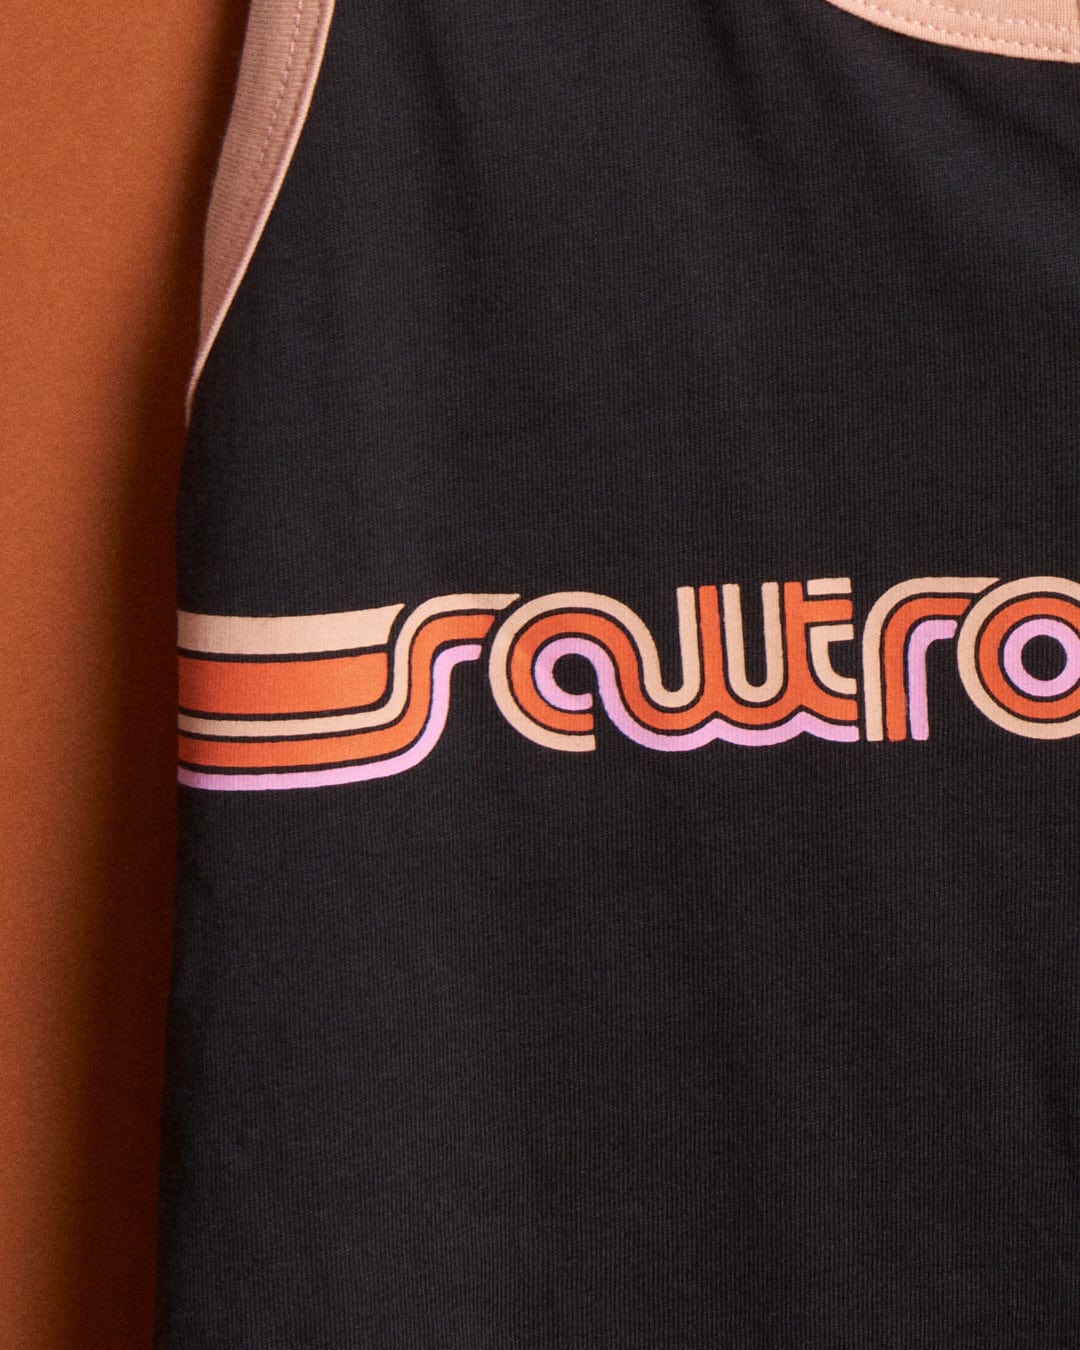 Close-up of a Saltrock Retro Ribbon - Womens Vest - Dark Grey tank top with the word "power" printed in stylized orange and pink retro font, partially visible, featuring a retro ribbon stripe.